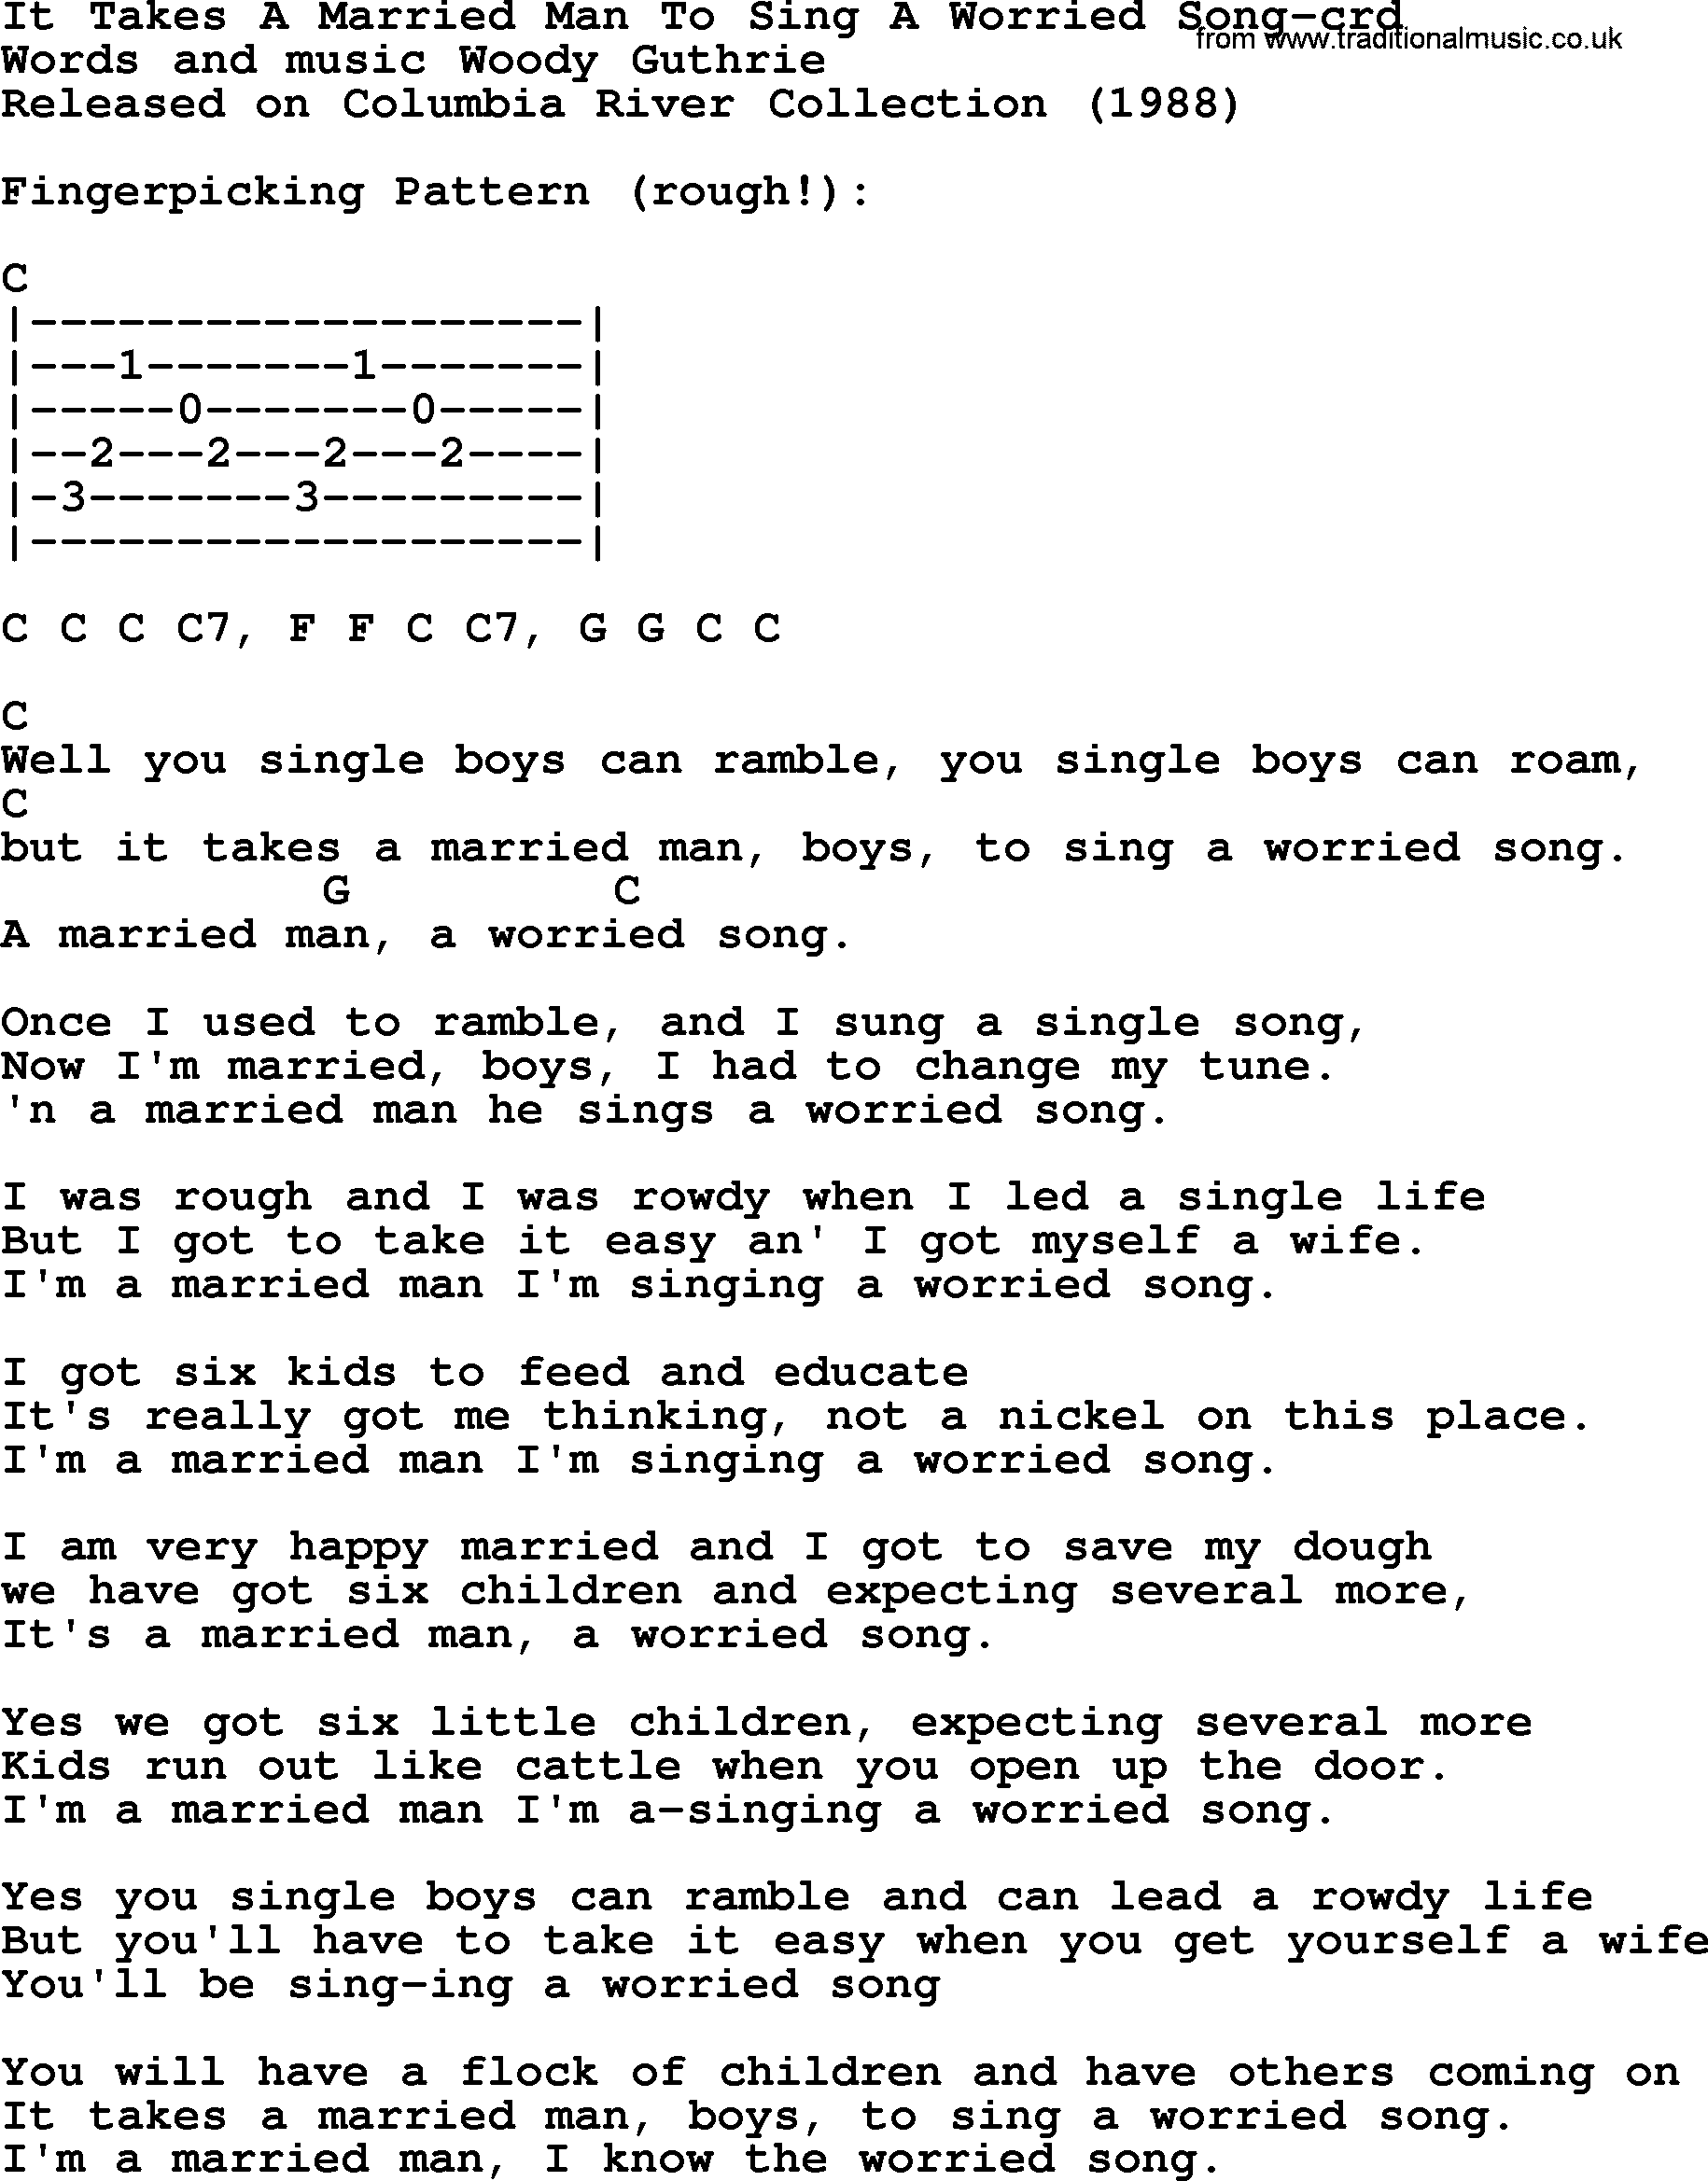 Woody Guthrie song It Takes A Married Man To Sing A Worried Song lyrics and chords